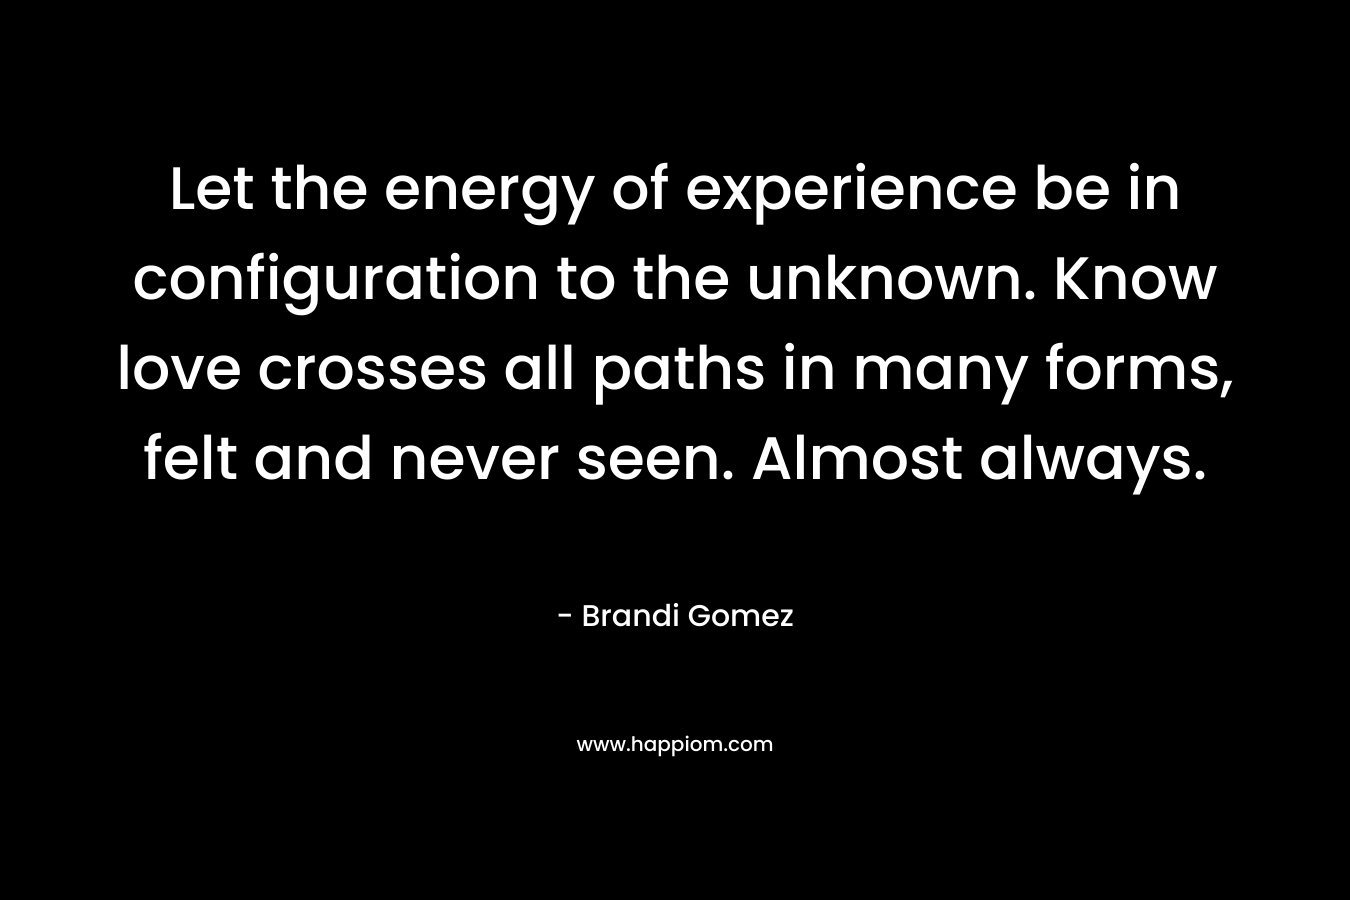 Let the energy of experience be in configuration to the unknown. Know love crosses all paths in many forms, felt and never seen. Almost always. – Brandi Gomez